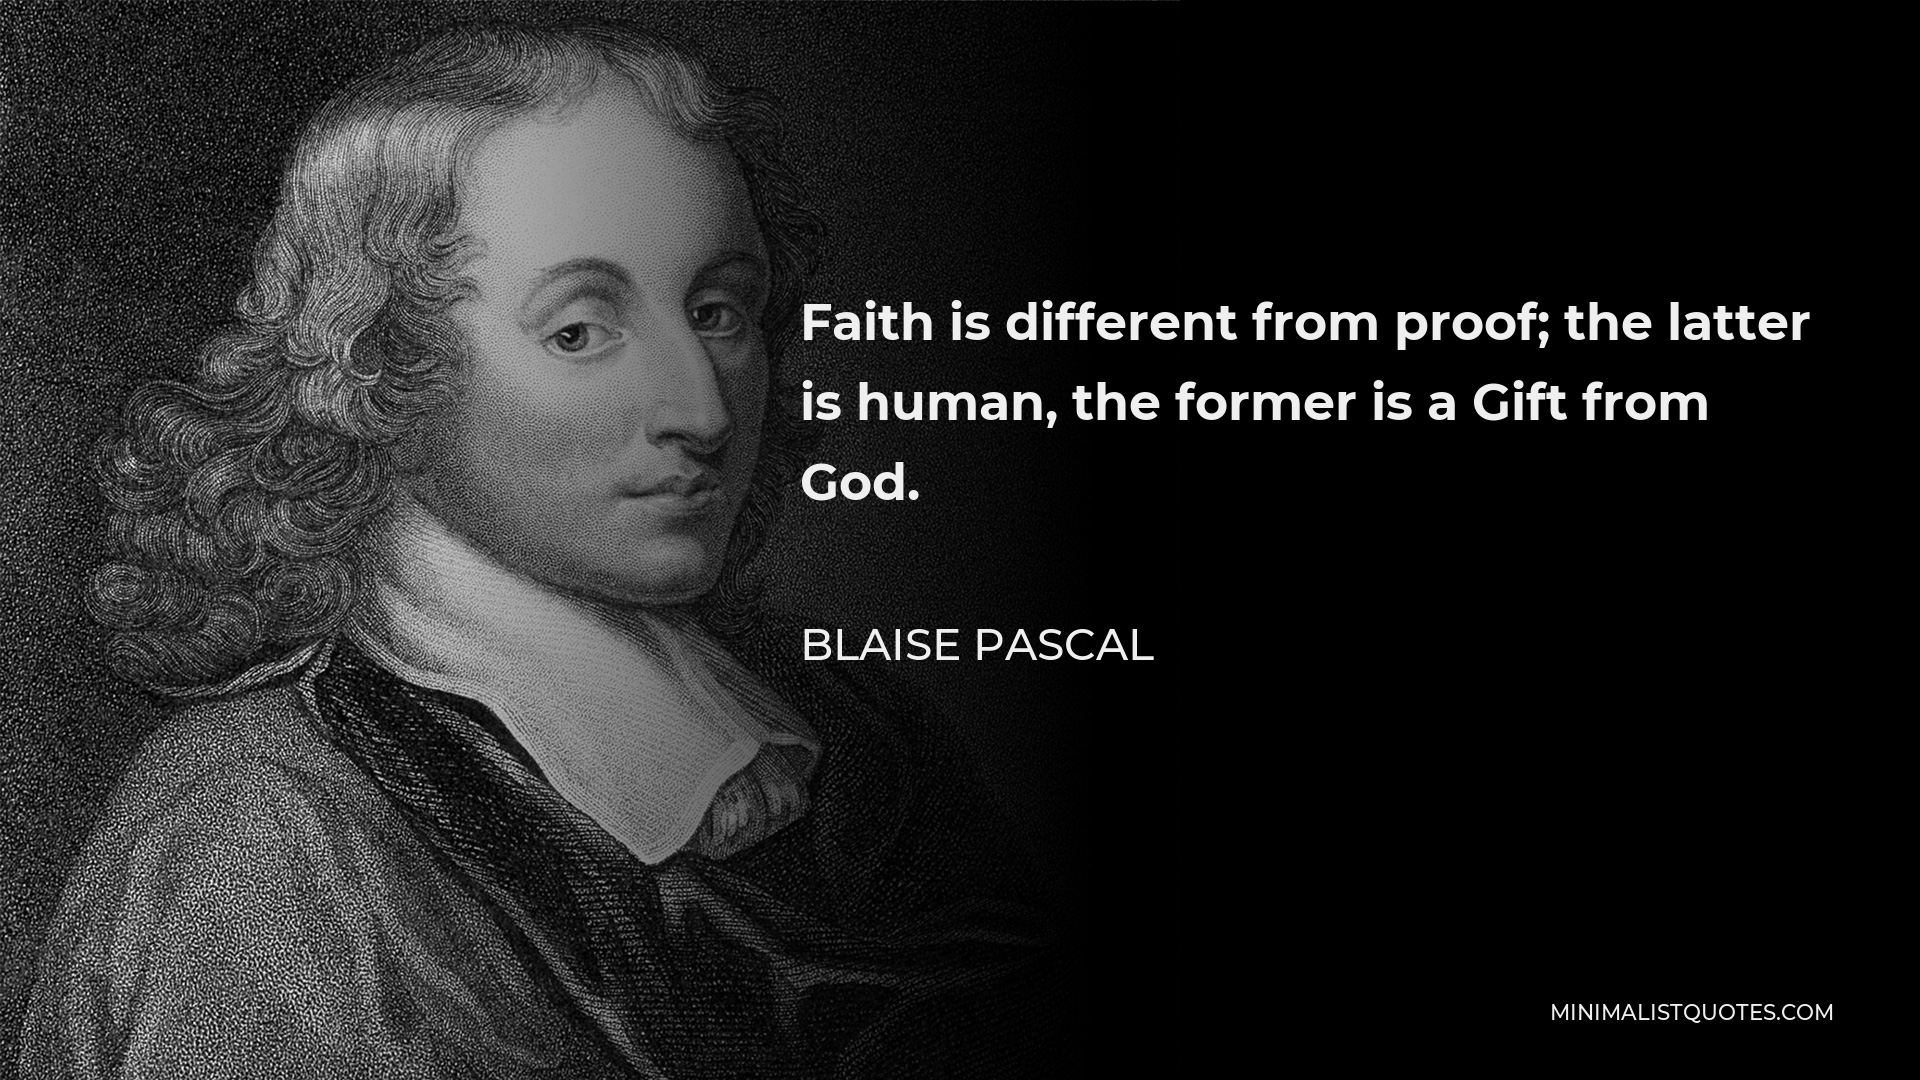 Blaise Pascal Quote - Faith is different from proof; the latter is human, the former is a Gift from God.